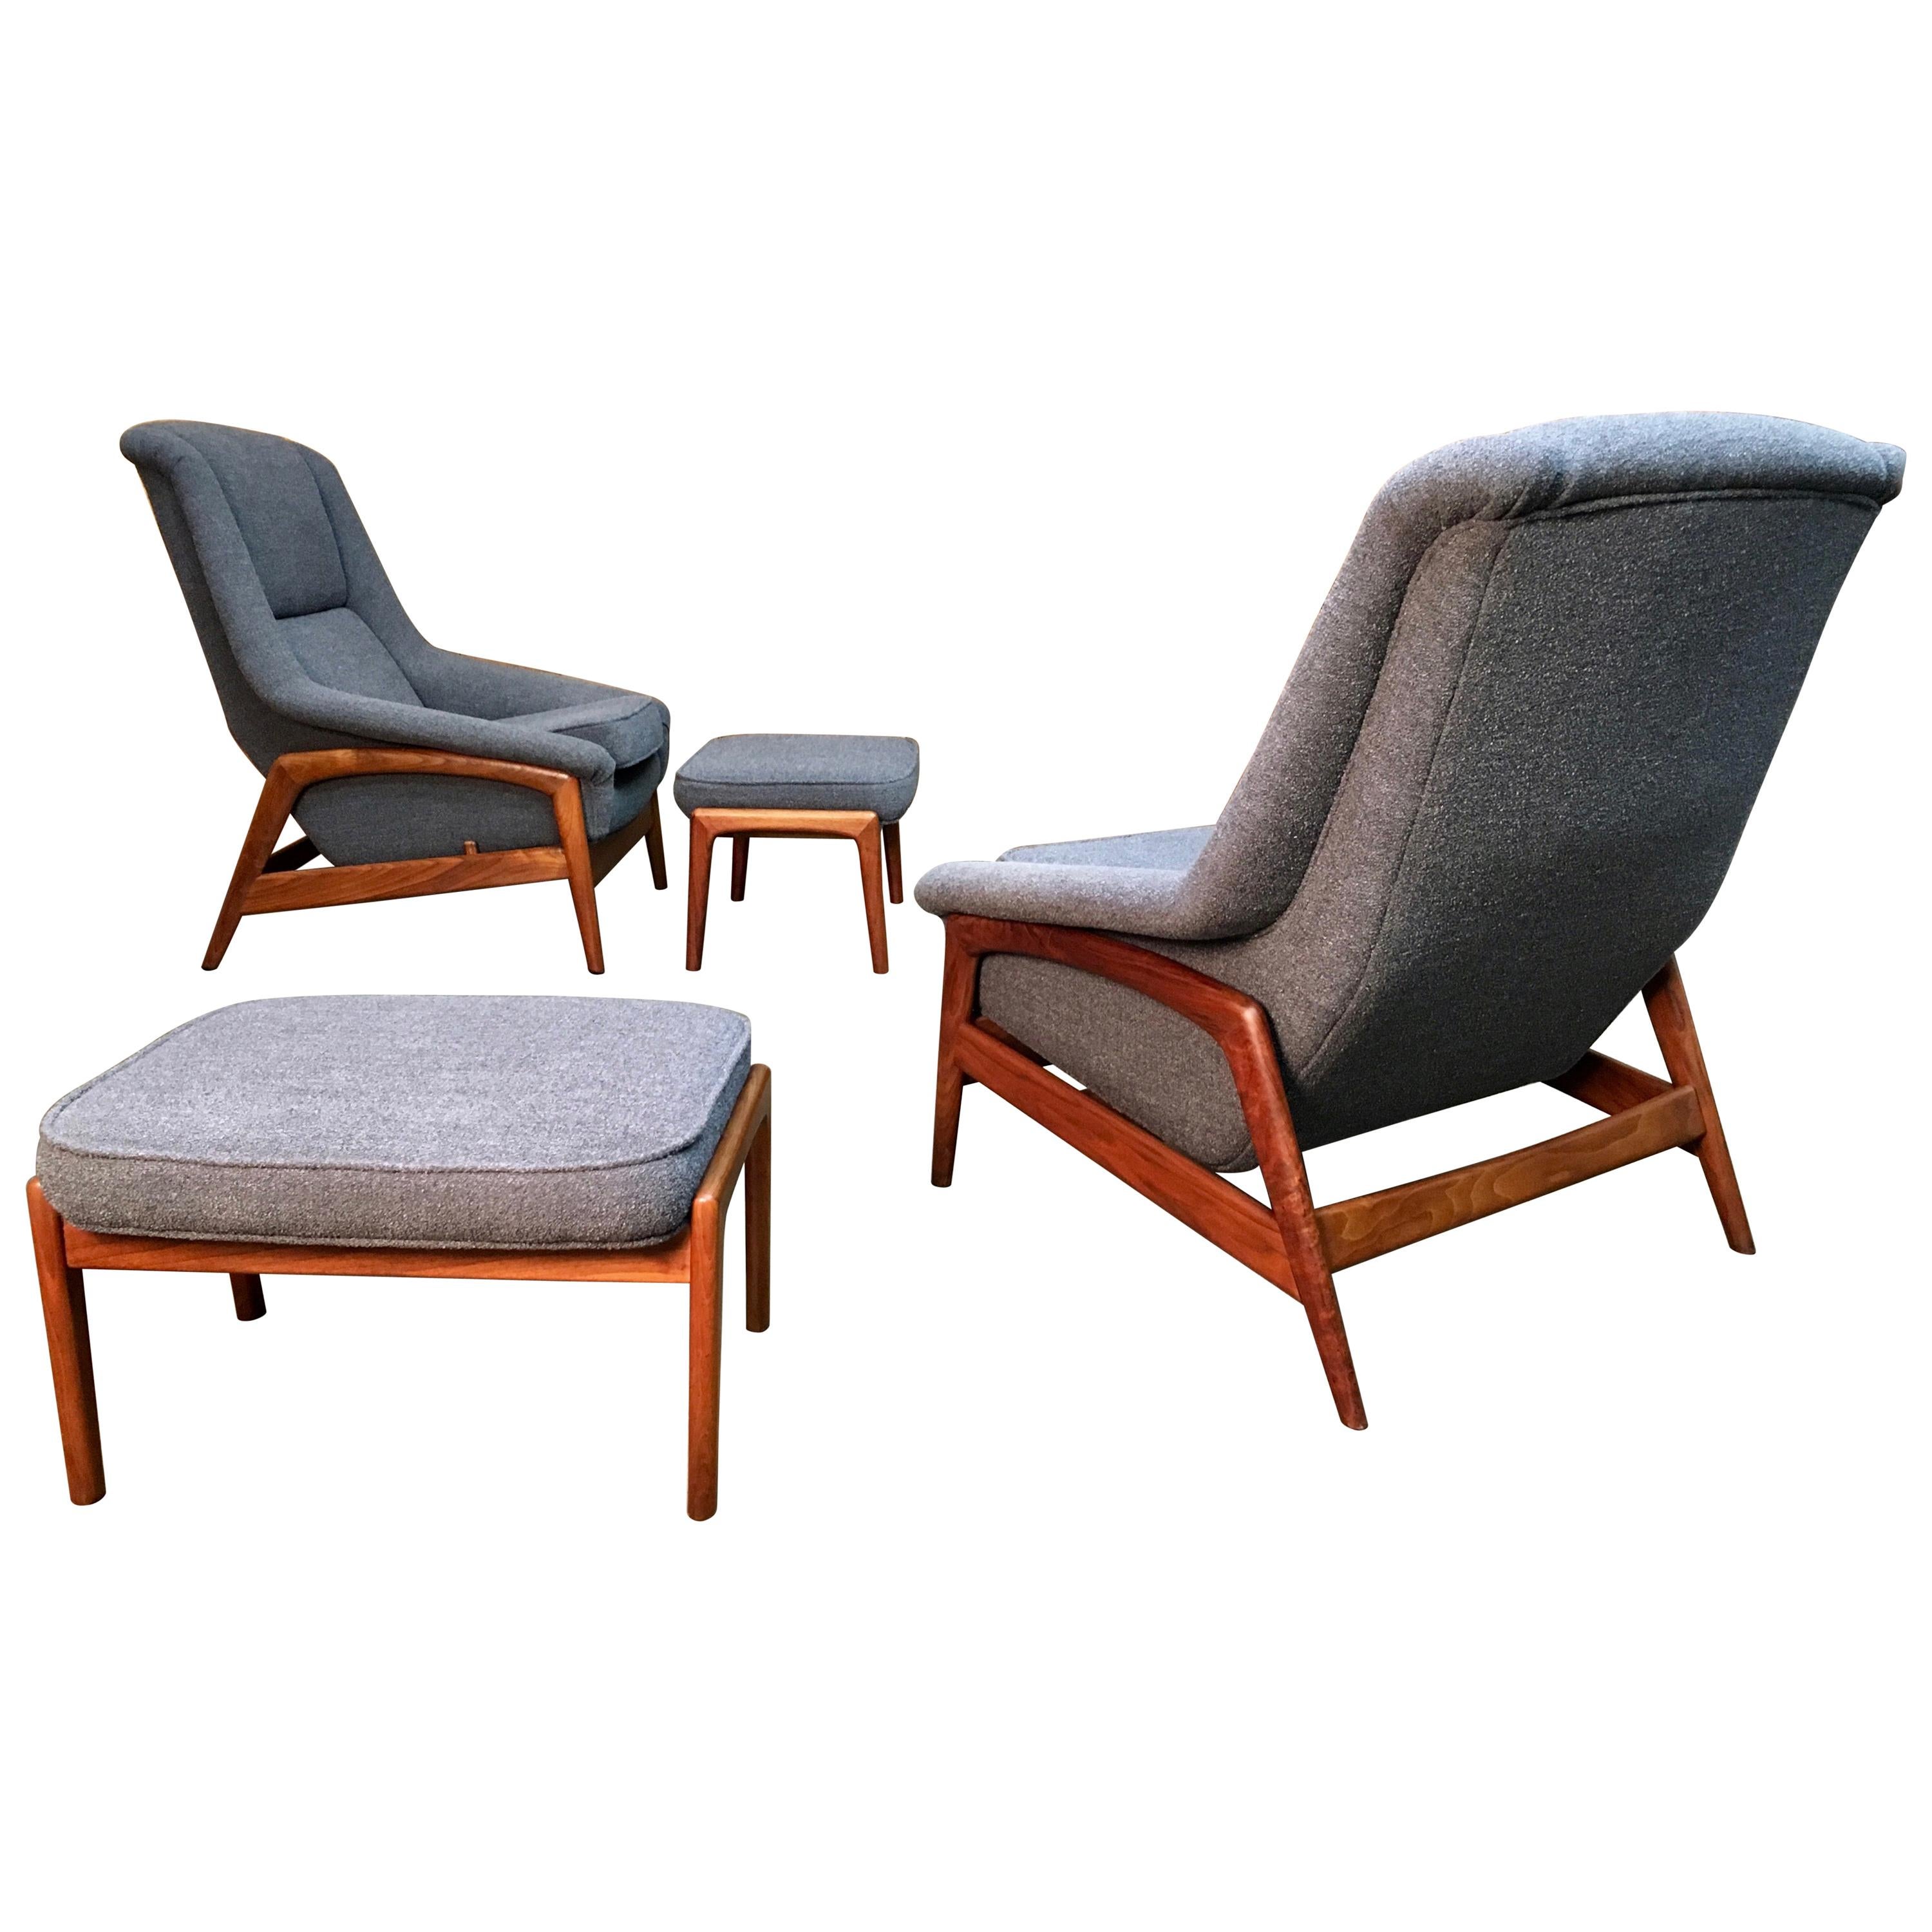 Pair of Folke Ohlsson for DUX "Profil" Lounge Chair with Ottoman